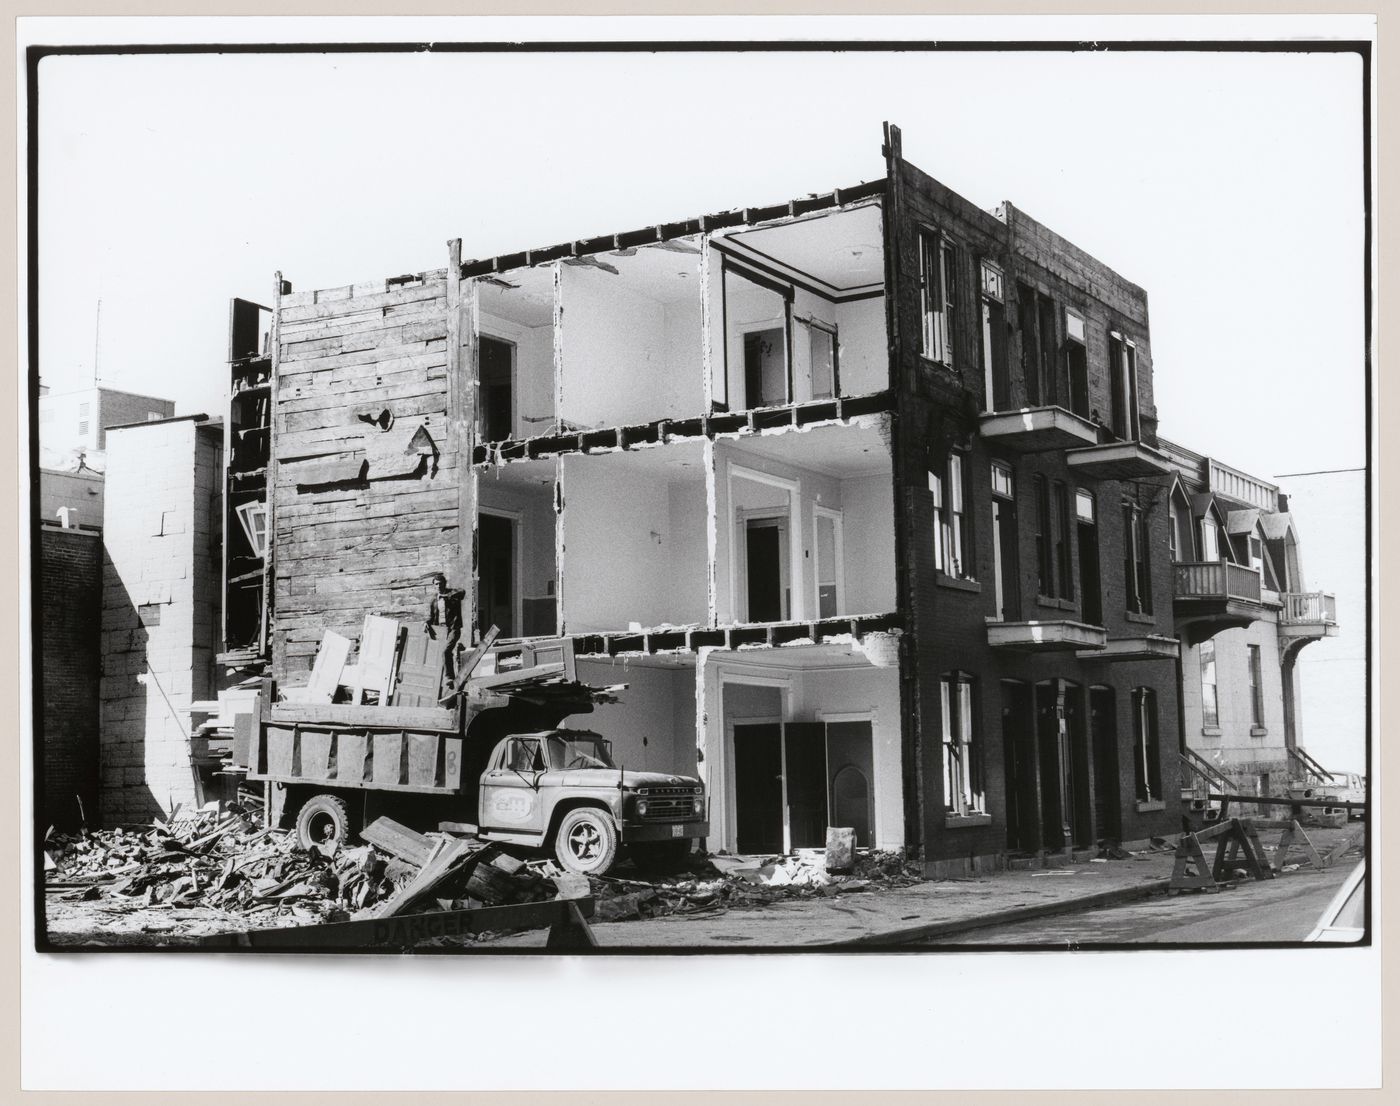 View of the principal and lateral façades of an apartment house under demolition showing the interior of the building, rue  Notre-Dame, Montréal, Québec, Canada